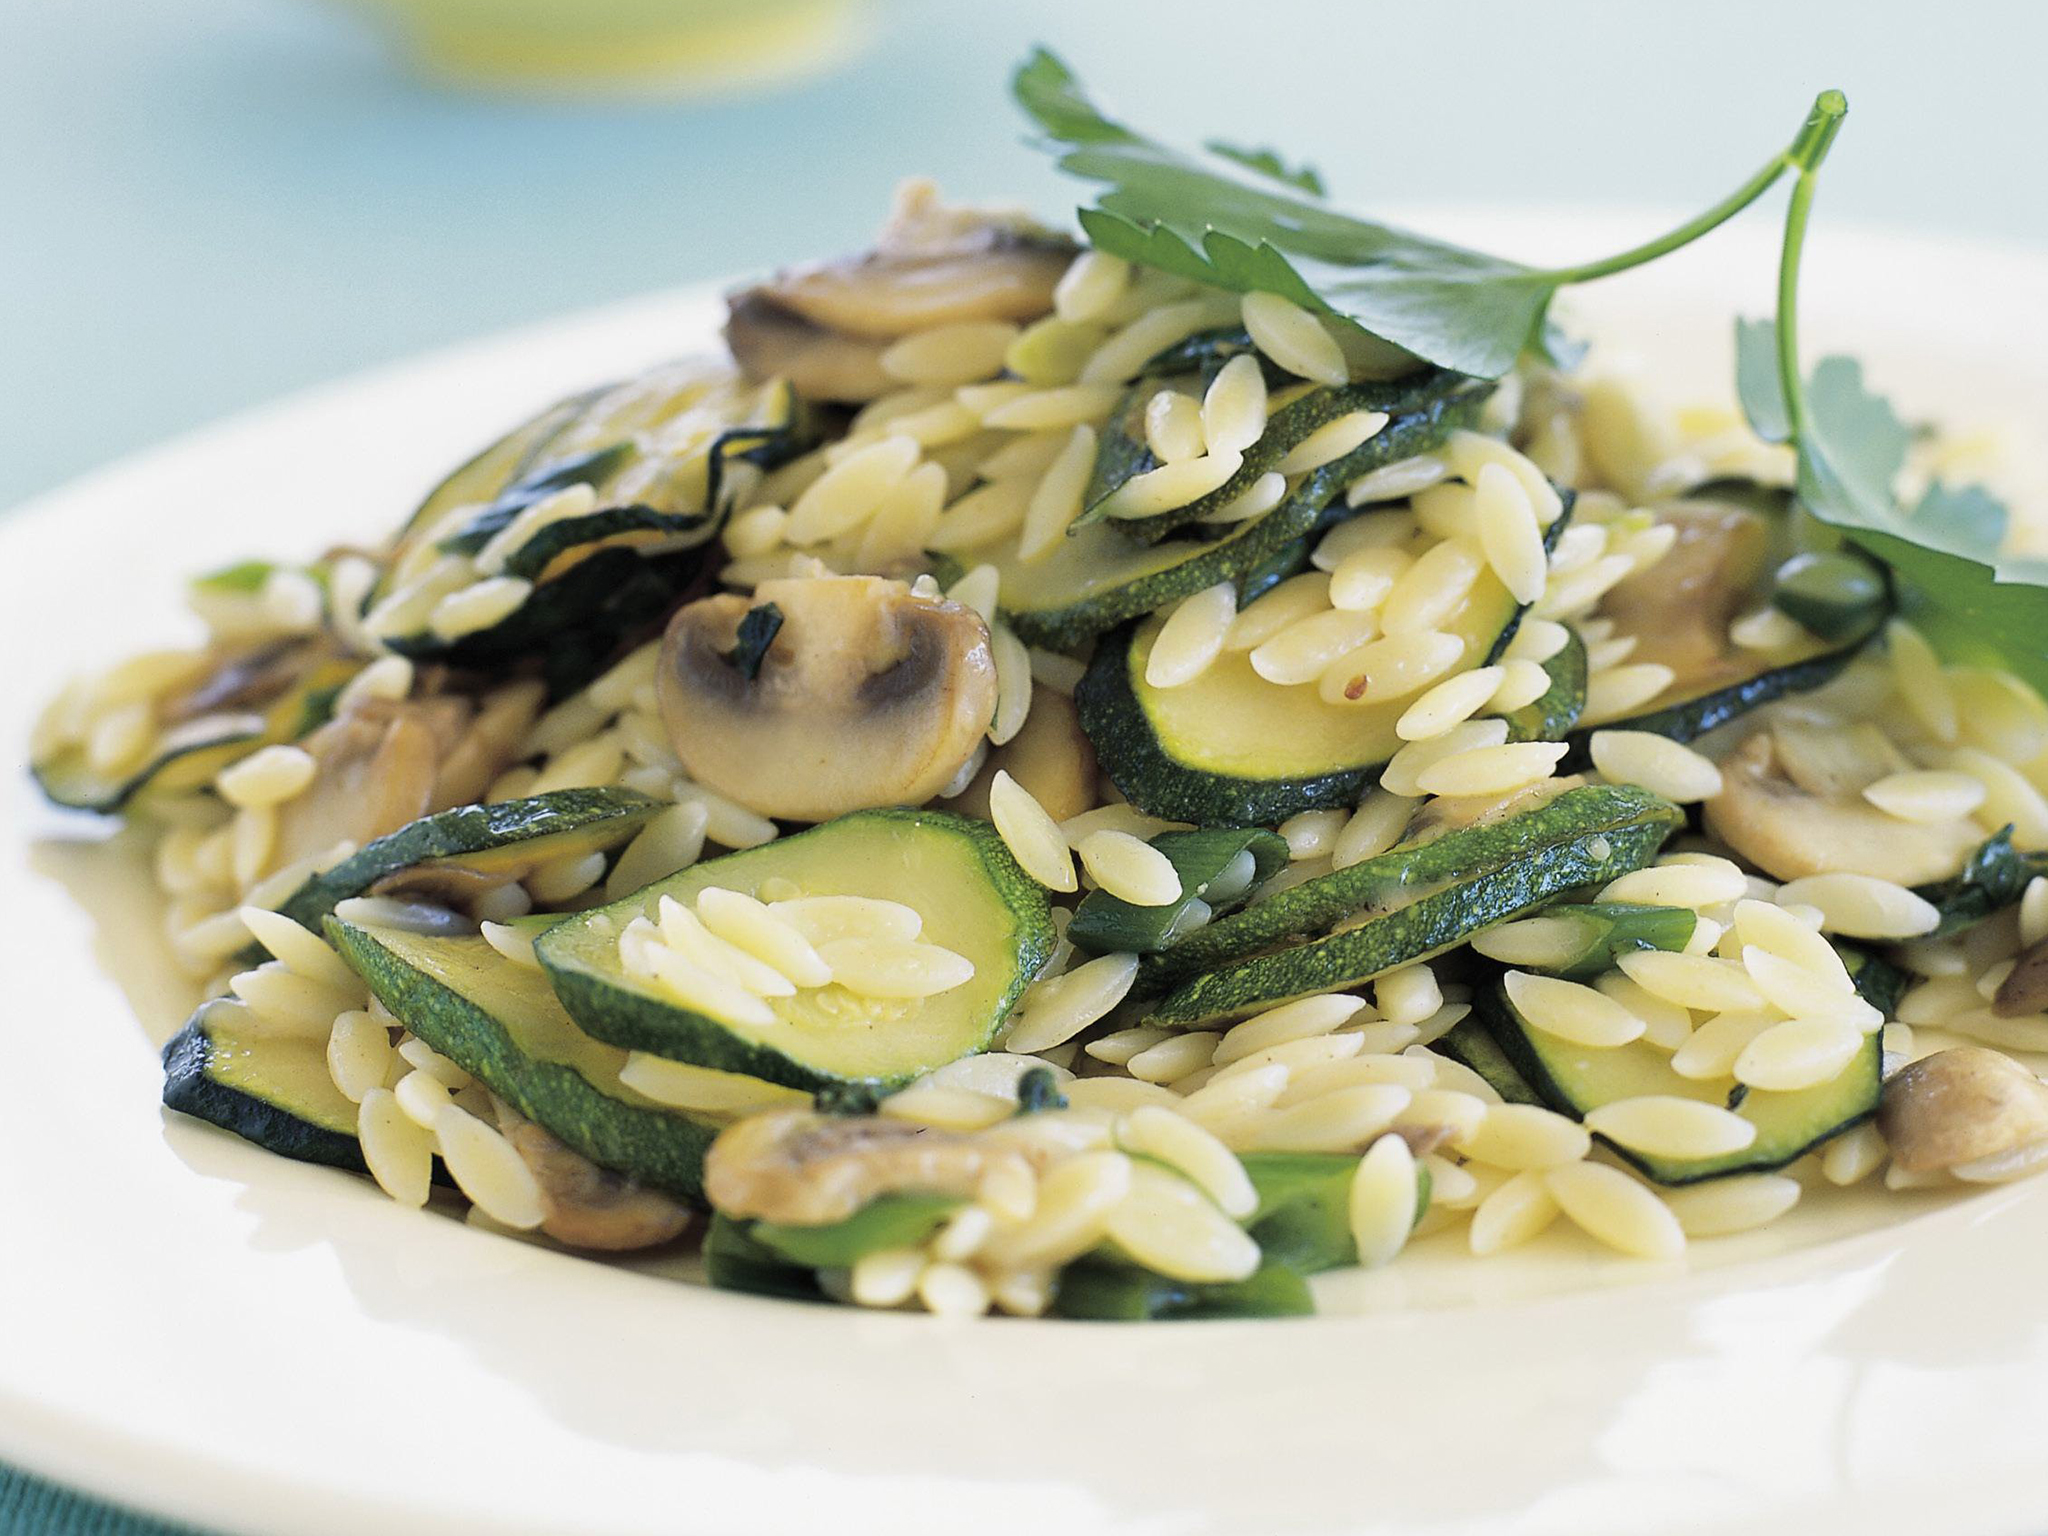 Risoni with mushrooms, zucchini and green onions